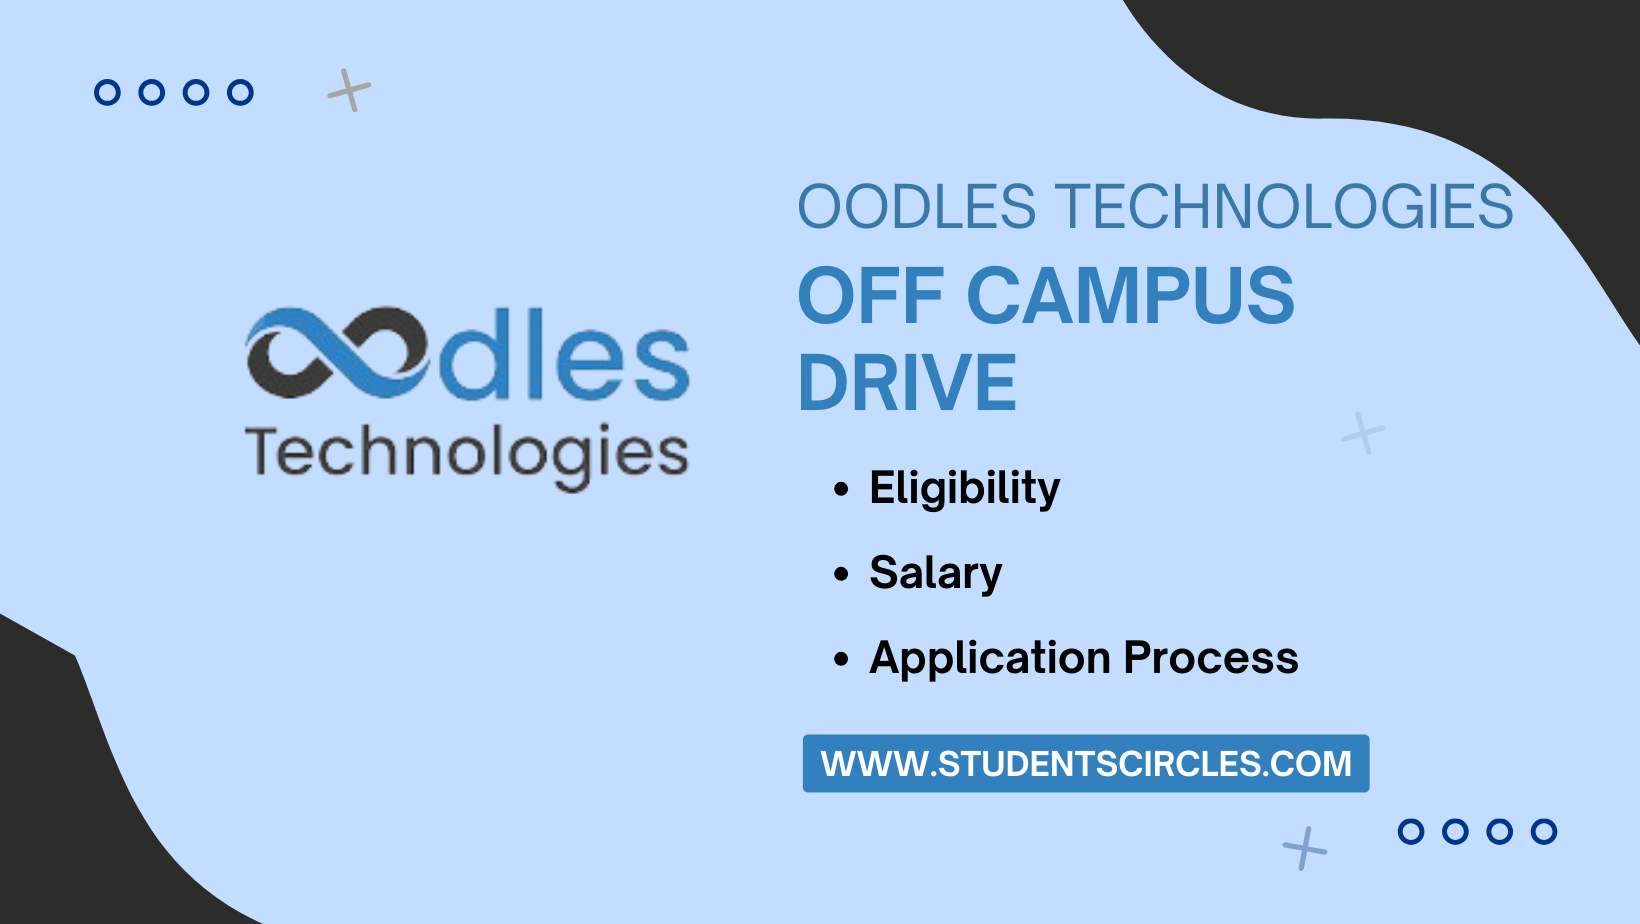 Oodles Technologies Off Campus Drive